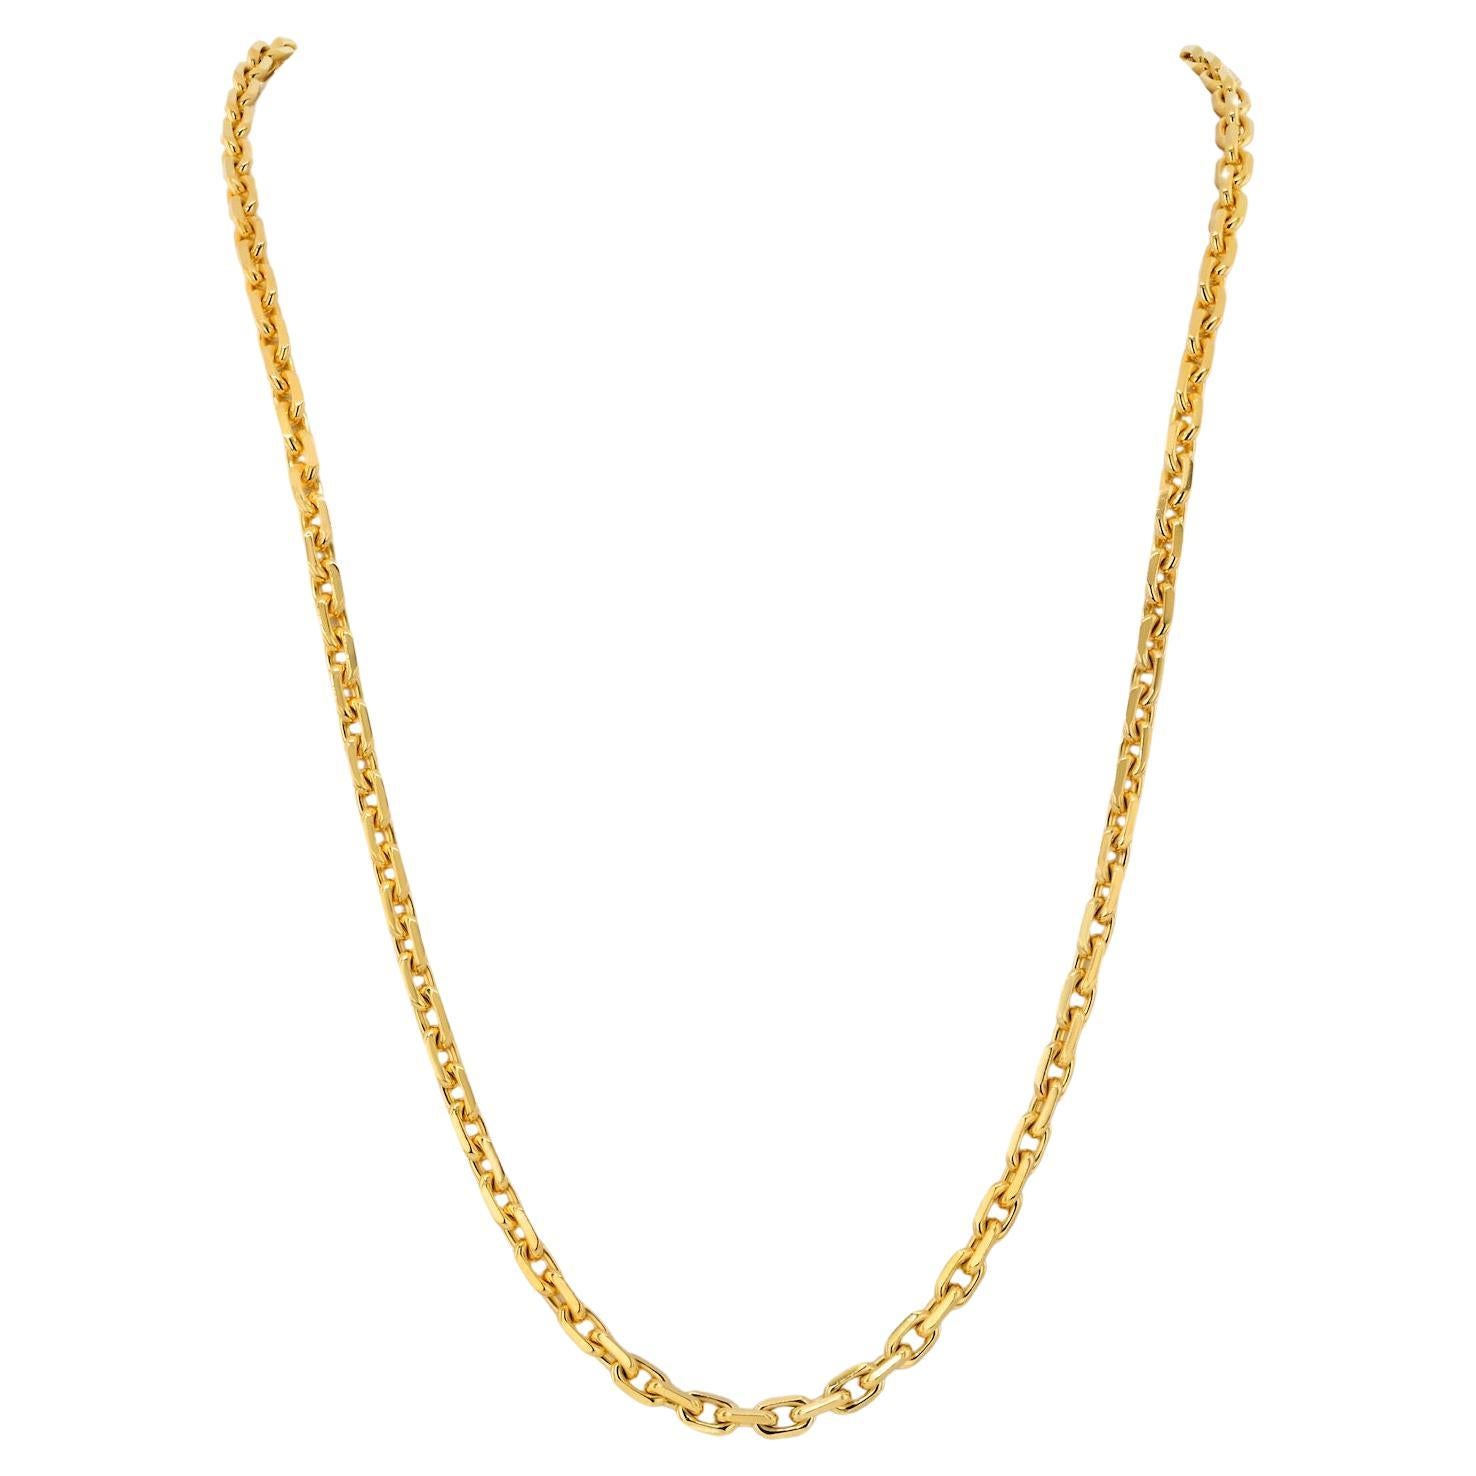 Boucheron 18 Karat Yellow Gold 35 Inches Long Chain Necklace For Sale